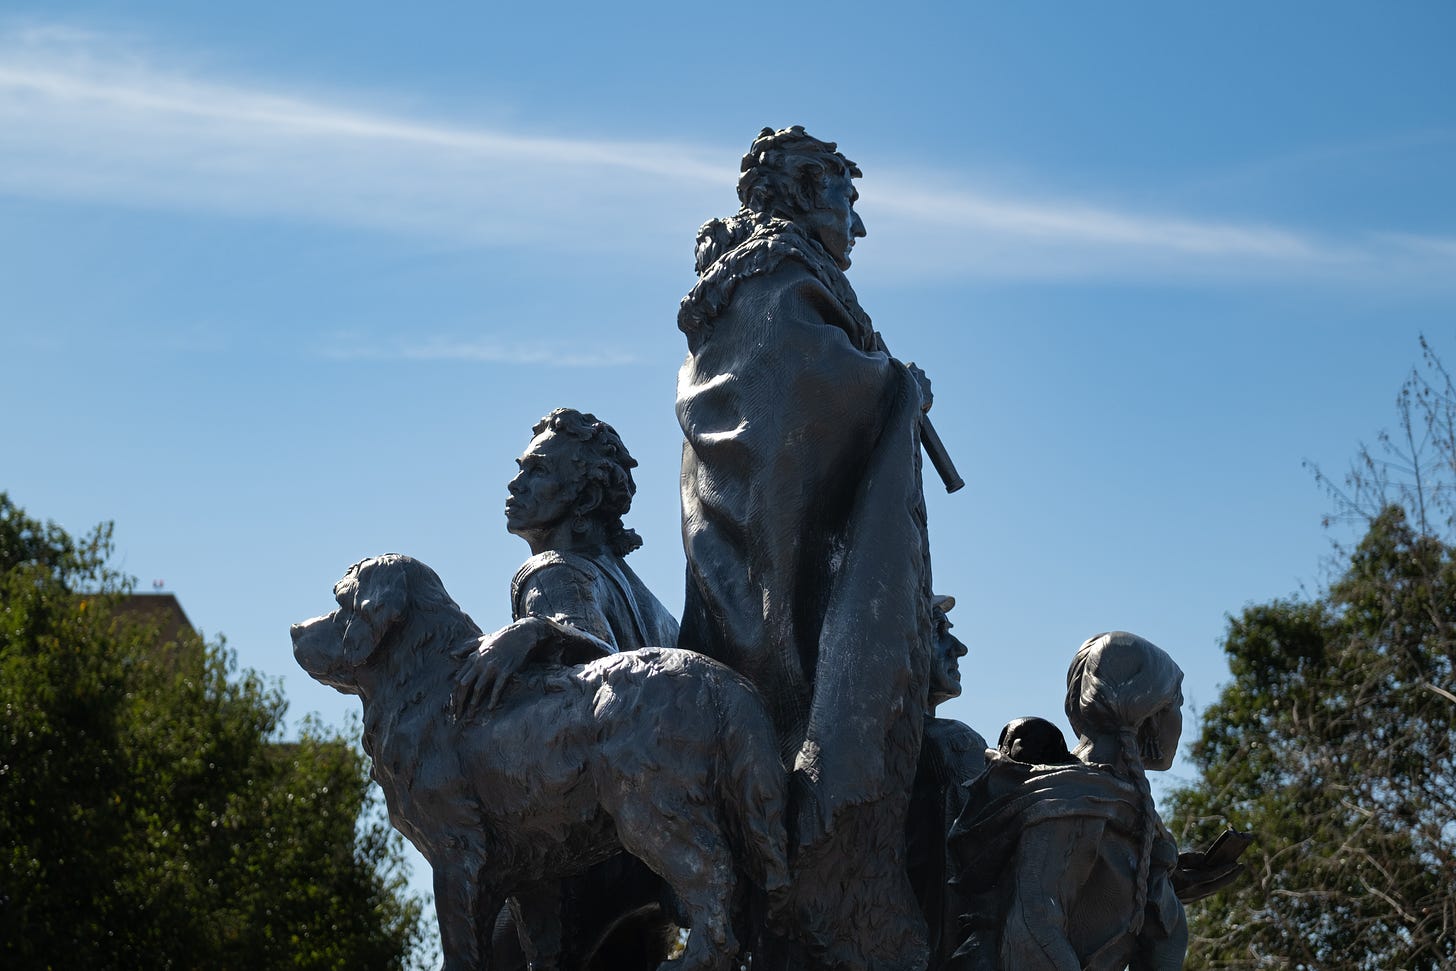 The Corps of Discovery monument to LEwis and Clark in Kansas City depicts Seaman the dog; York; Captains Lewis and Clark; and Sacajawea and her baby, Jean-Baptiste.